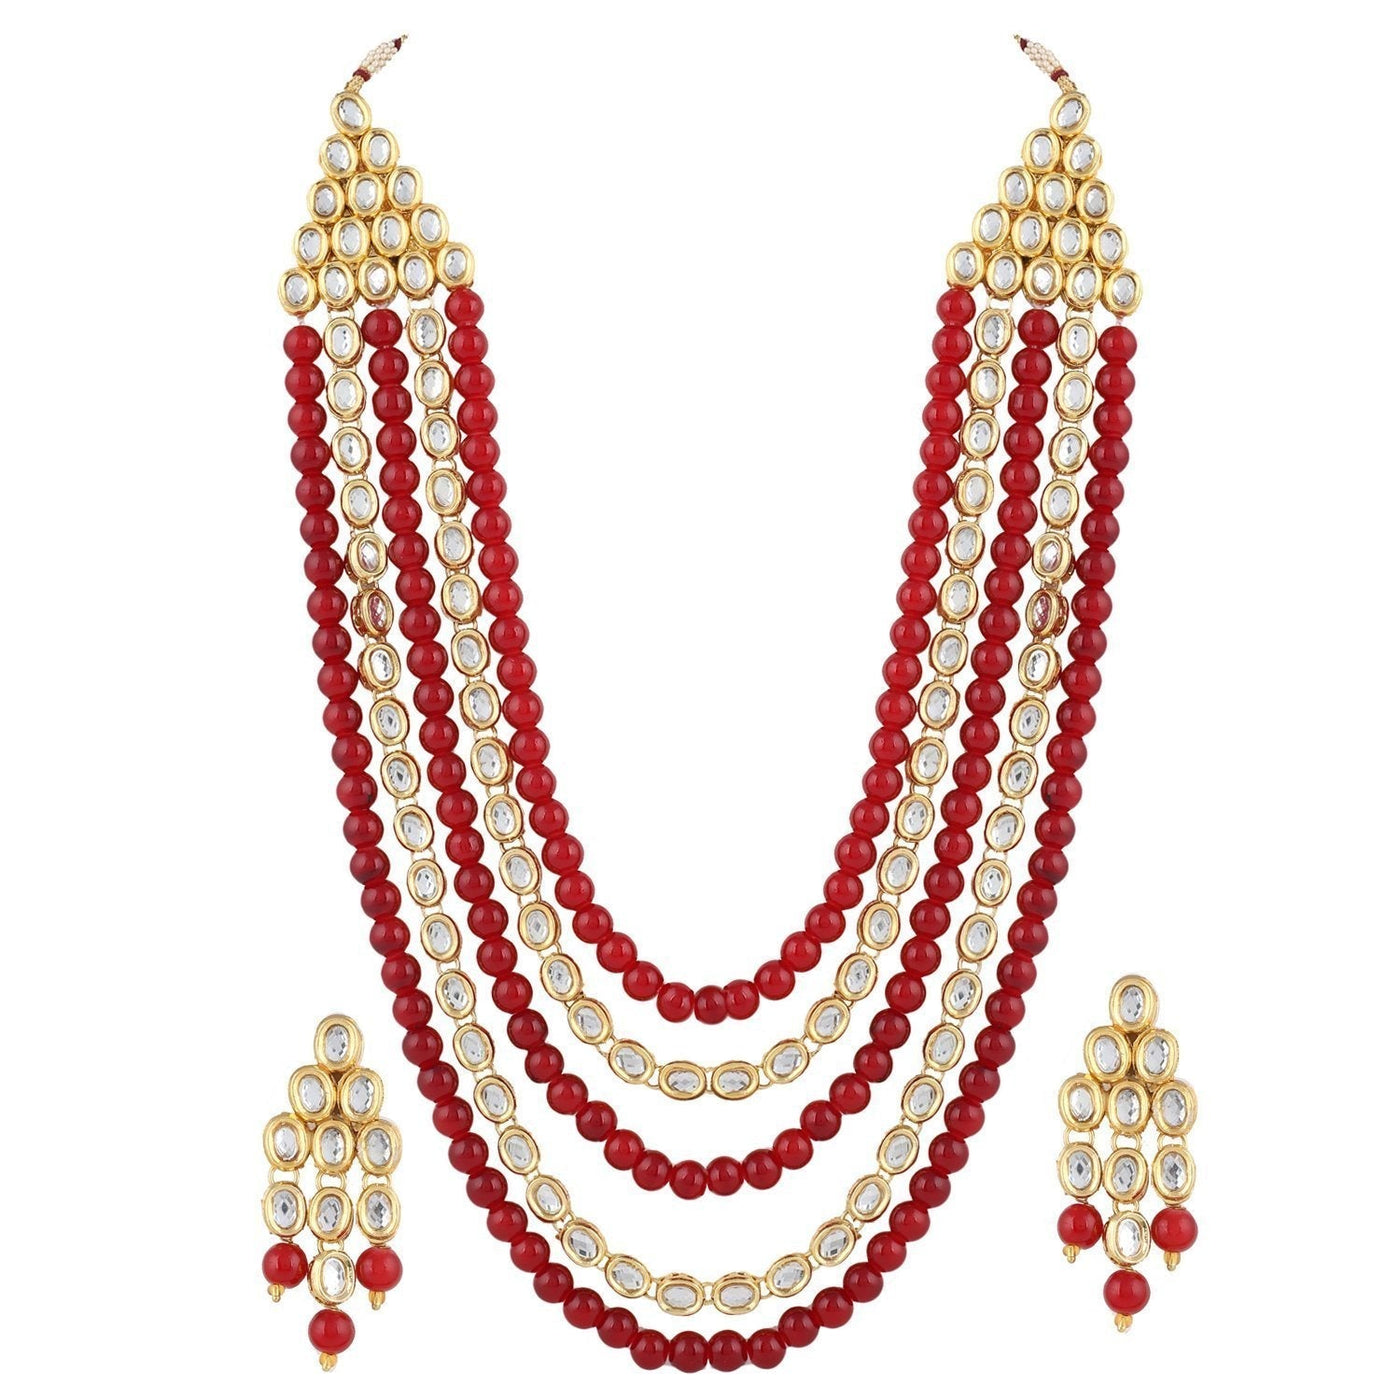 Women's gold plated kundan beads multi strand necklace set with earrings ij318pi - I Jewels